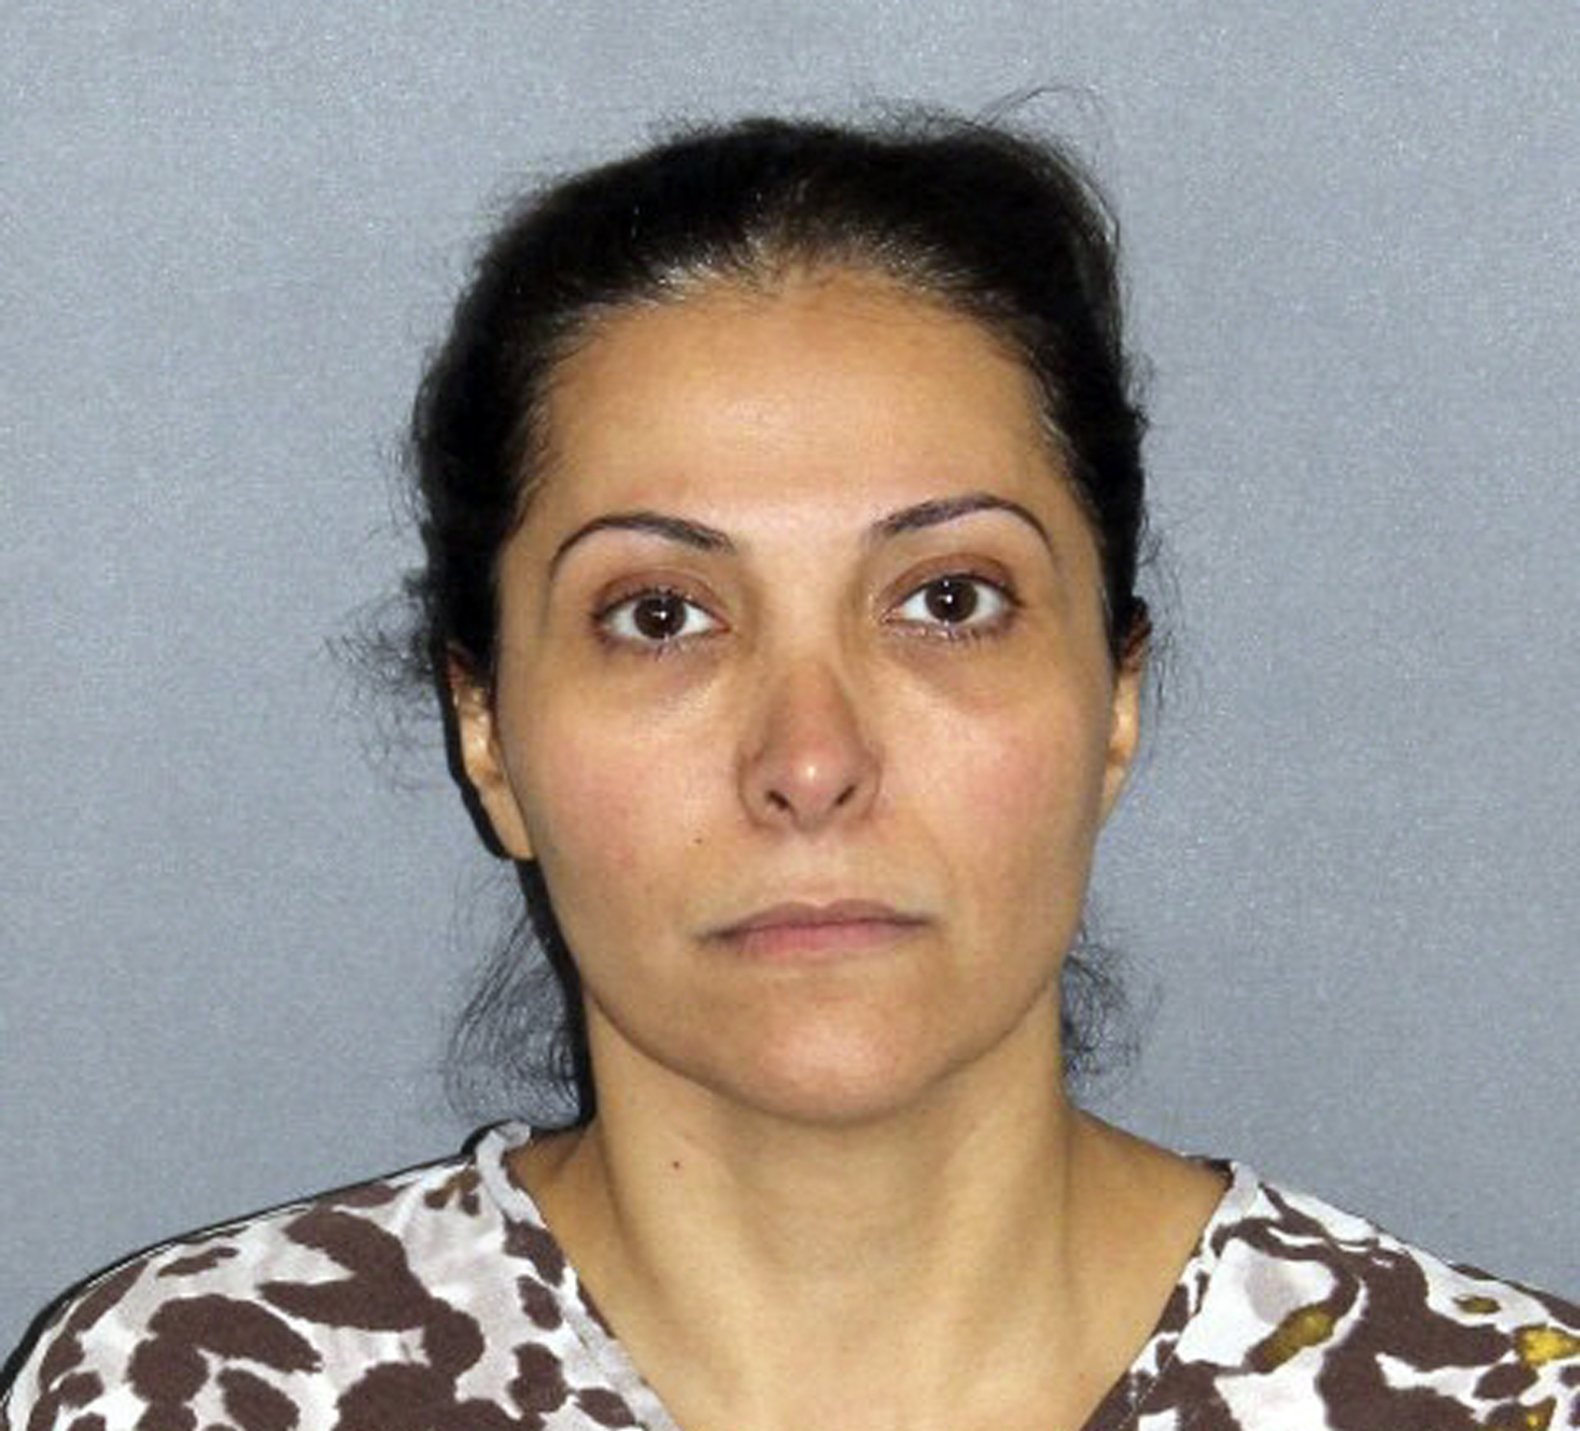 FILE - This file photo provided by the Irvine Police Department shows Meshael Alayban, who was arrested July 9, 2013 in Irvine, Calif., for allegedly holding a domestic servant against her will. Alayban, who prosecutors said is one of the wives of Saudi Prince Abdulrahman bin Nasser bin Abdulaziz al Saud, was expected to appear in an Orange County court for arraignment Thursday, July 11, 2013. (AP Photo/Irvine Police Department, File)